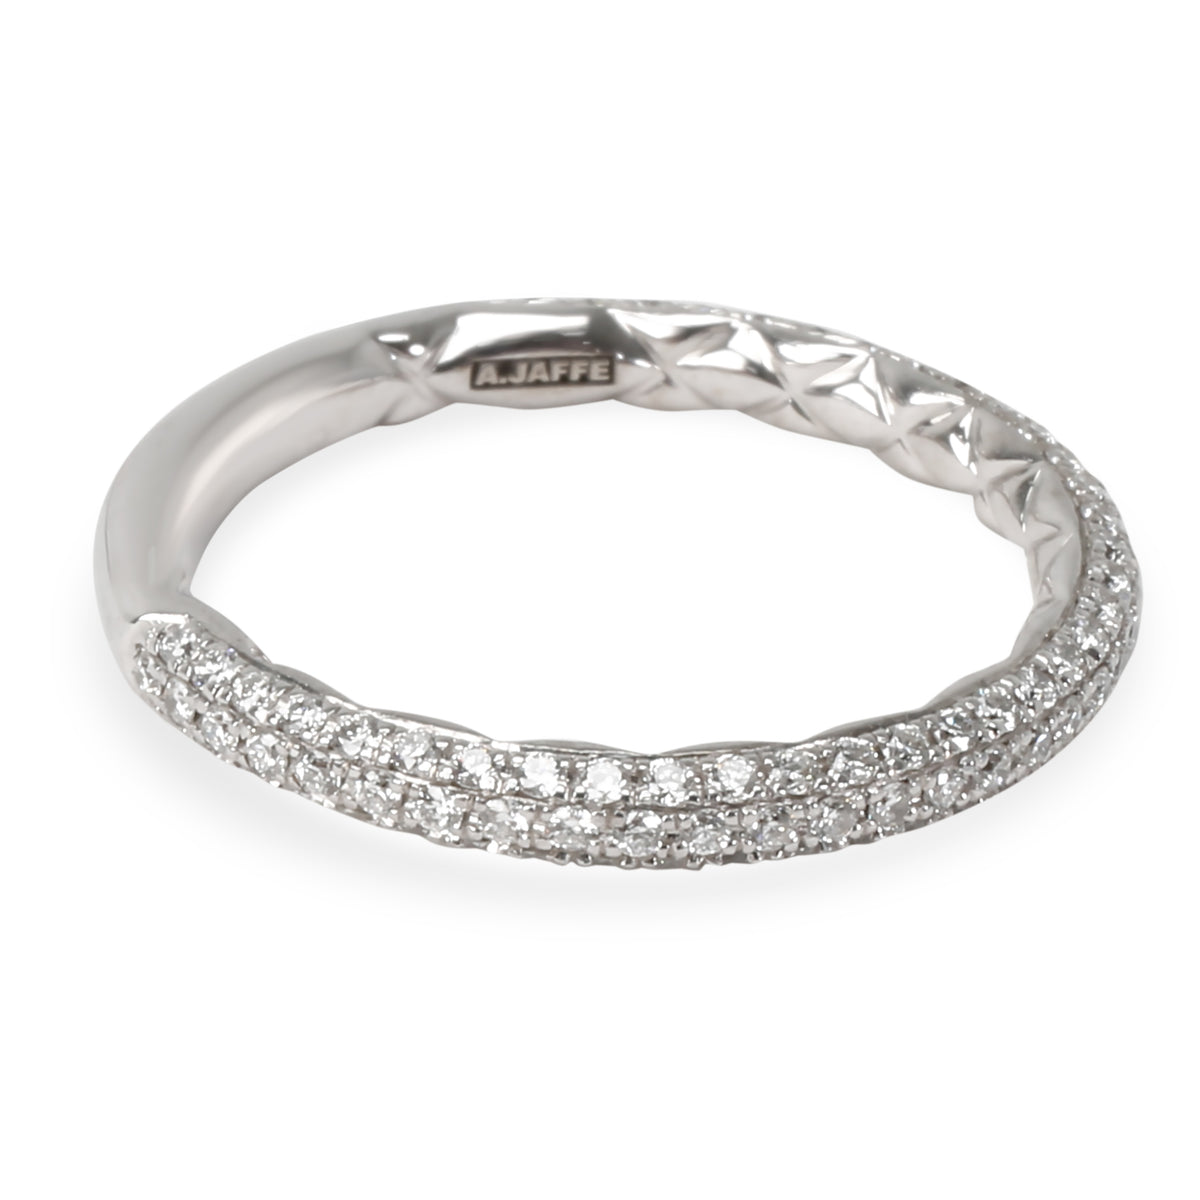 A. Jaffe Quilted Diamond Wedding Band in 14K White Gold (0.39 CTW)